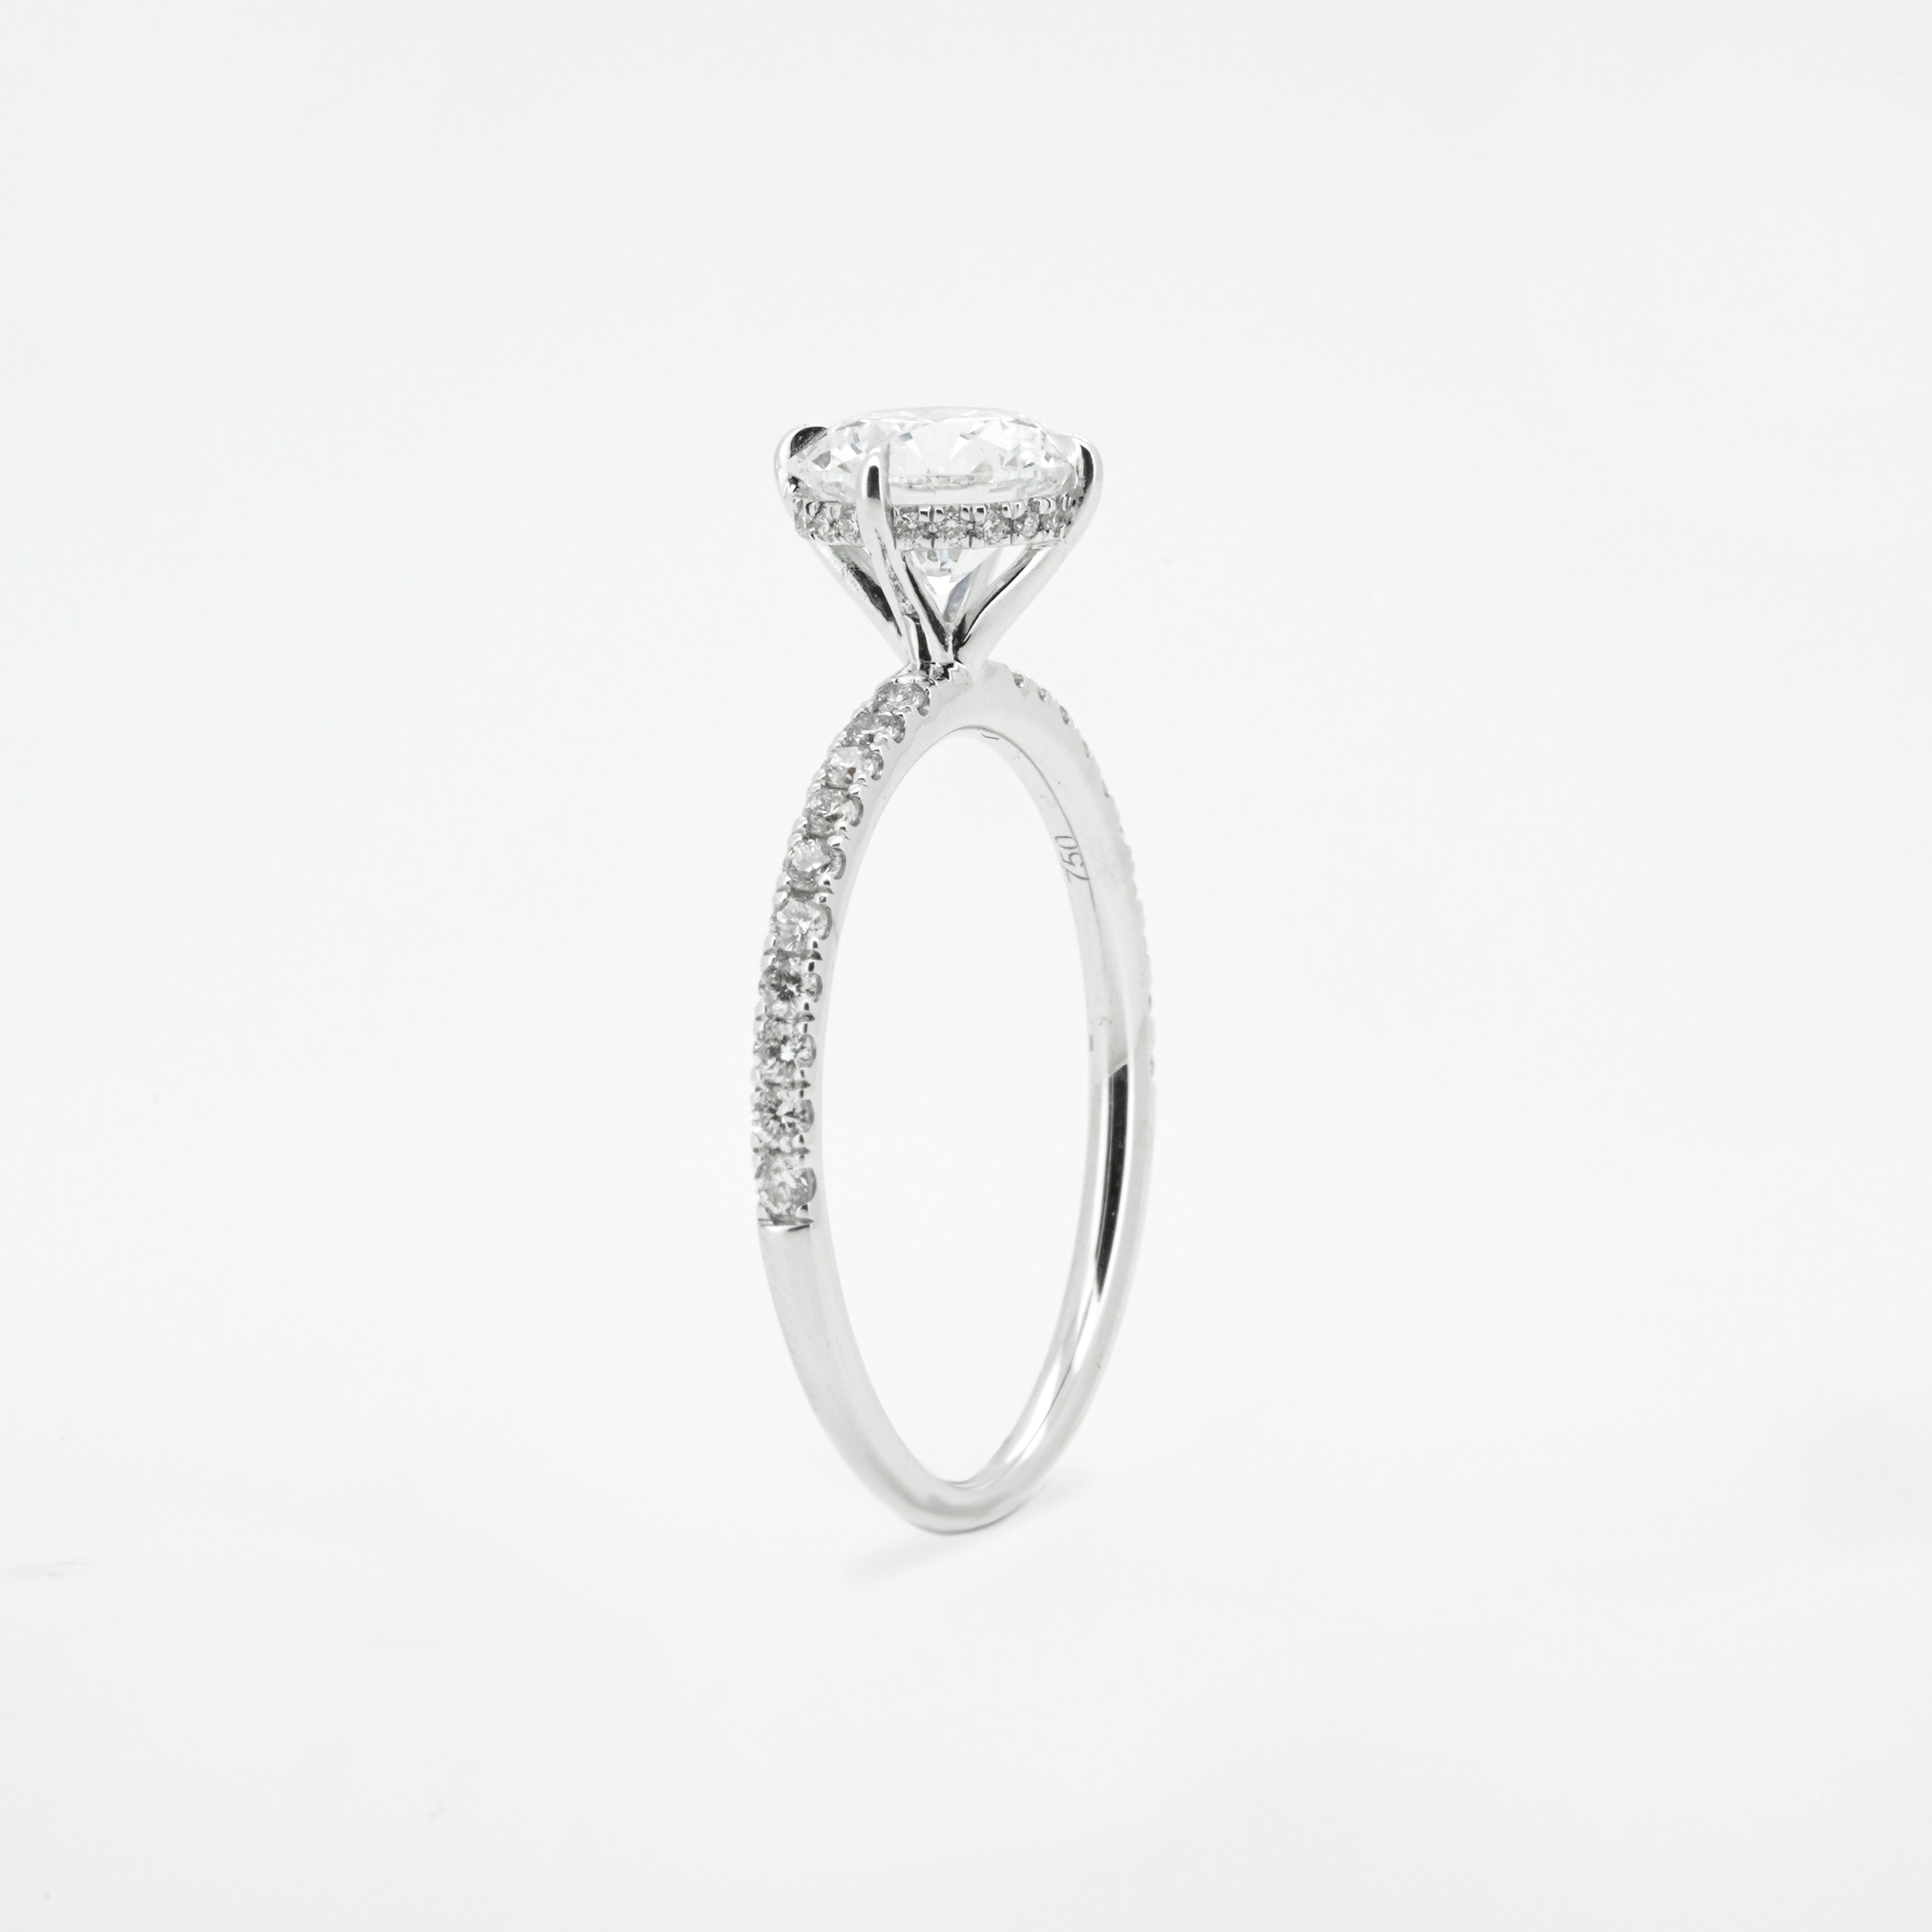 Round Diamond with 4 prong and Pave Diamond | Sol et Terre